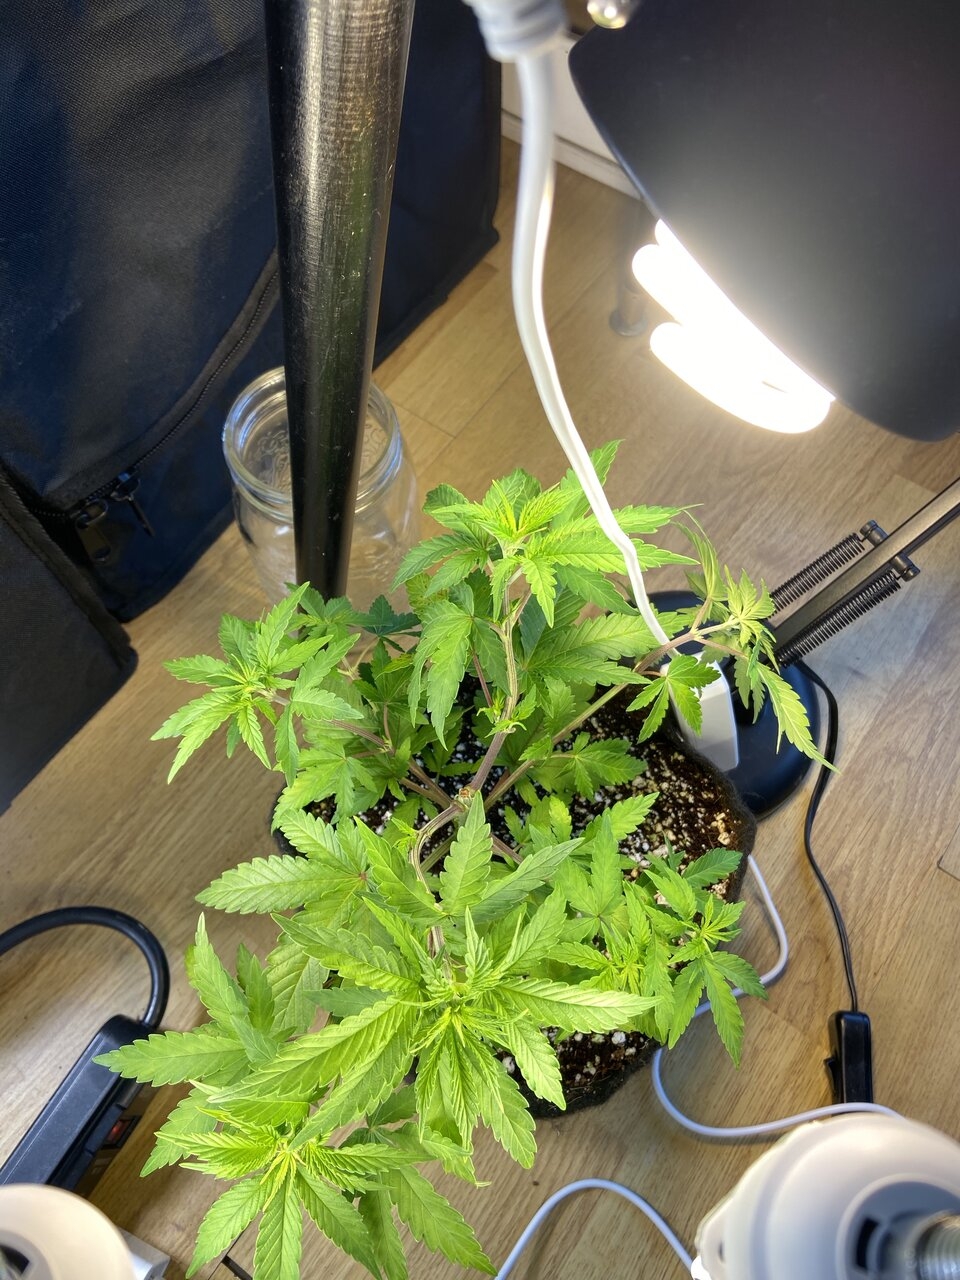 Shishkaberry, still in 1gal pot. With a new 65W LED + 26W CFL.